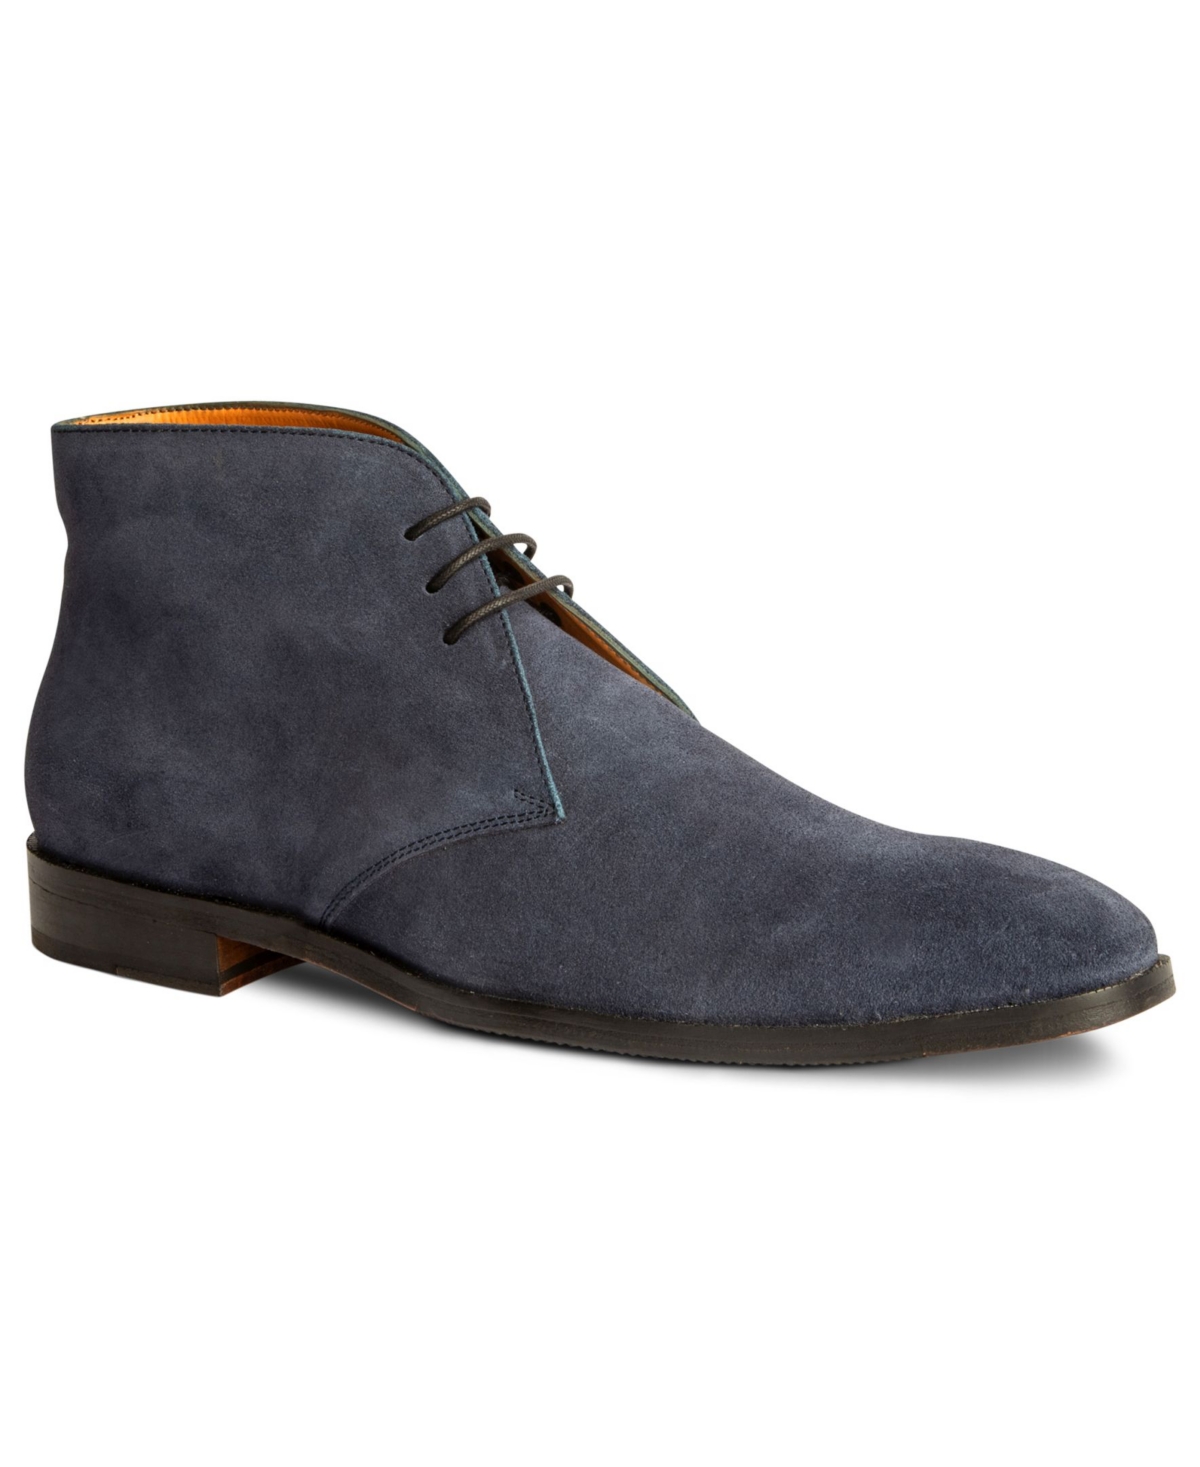 Corazon Chukka Boots Men's Lace-Up Casual - Deep Blue